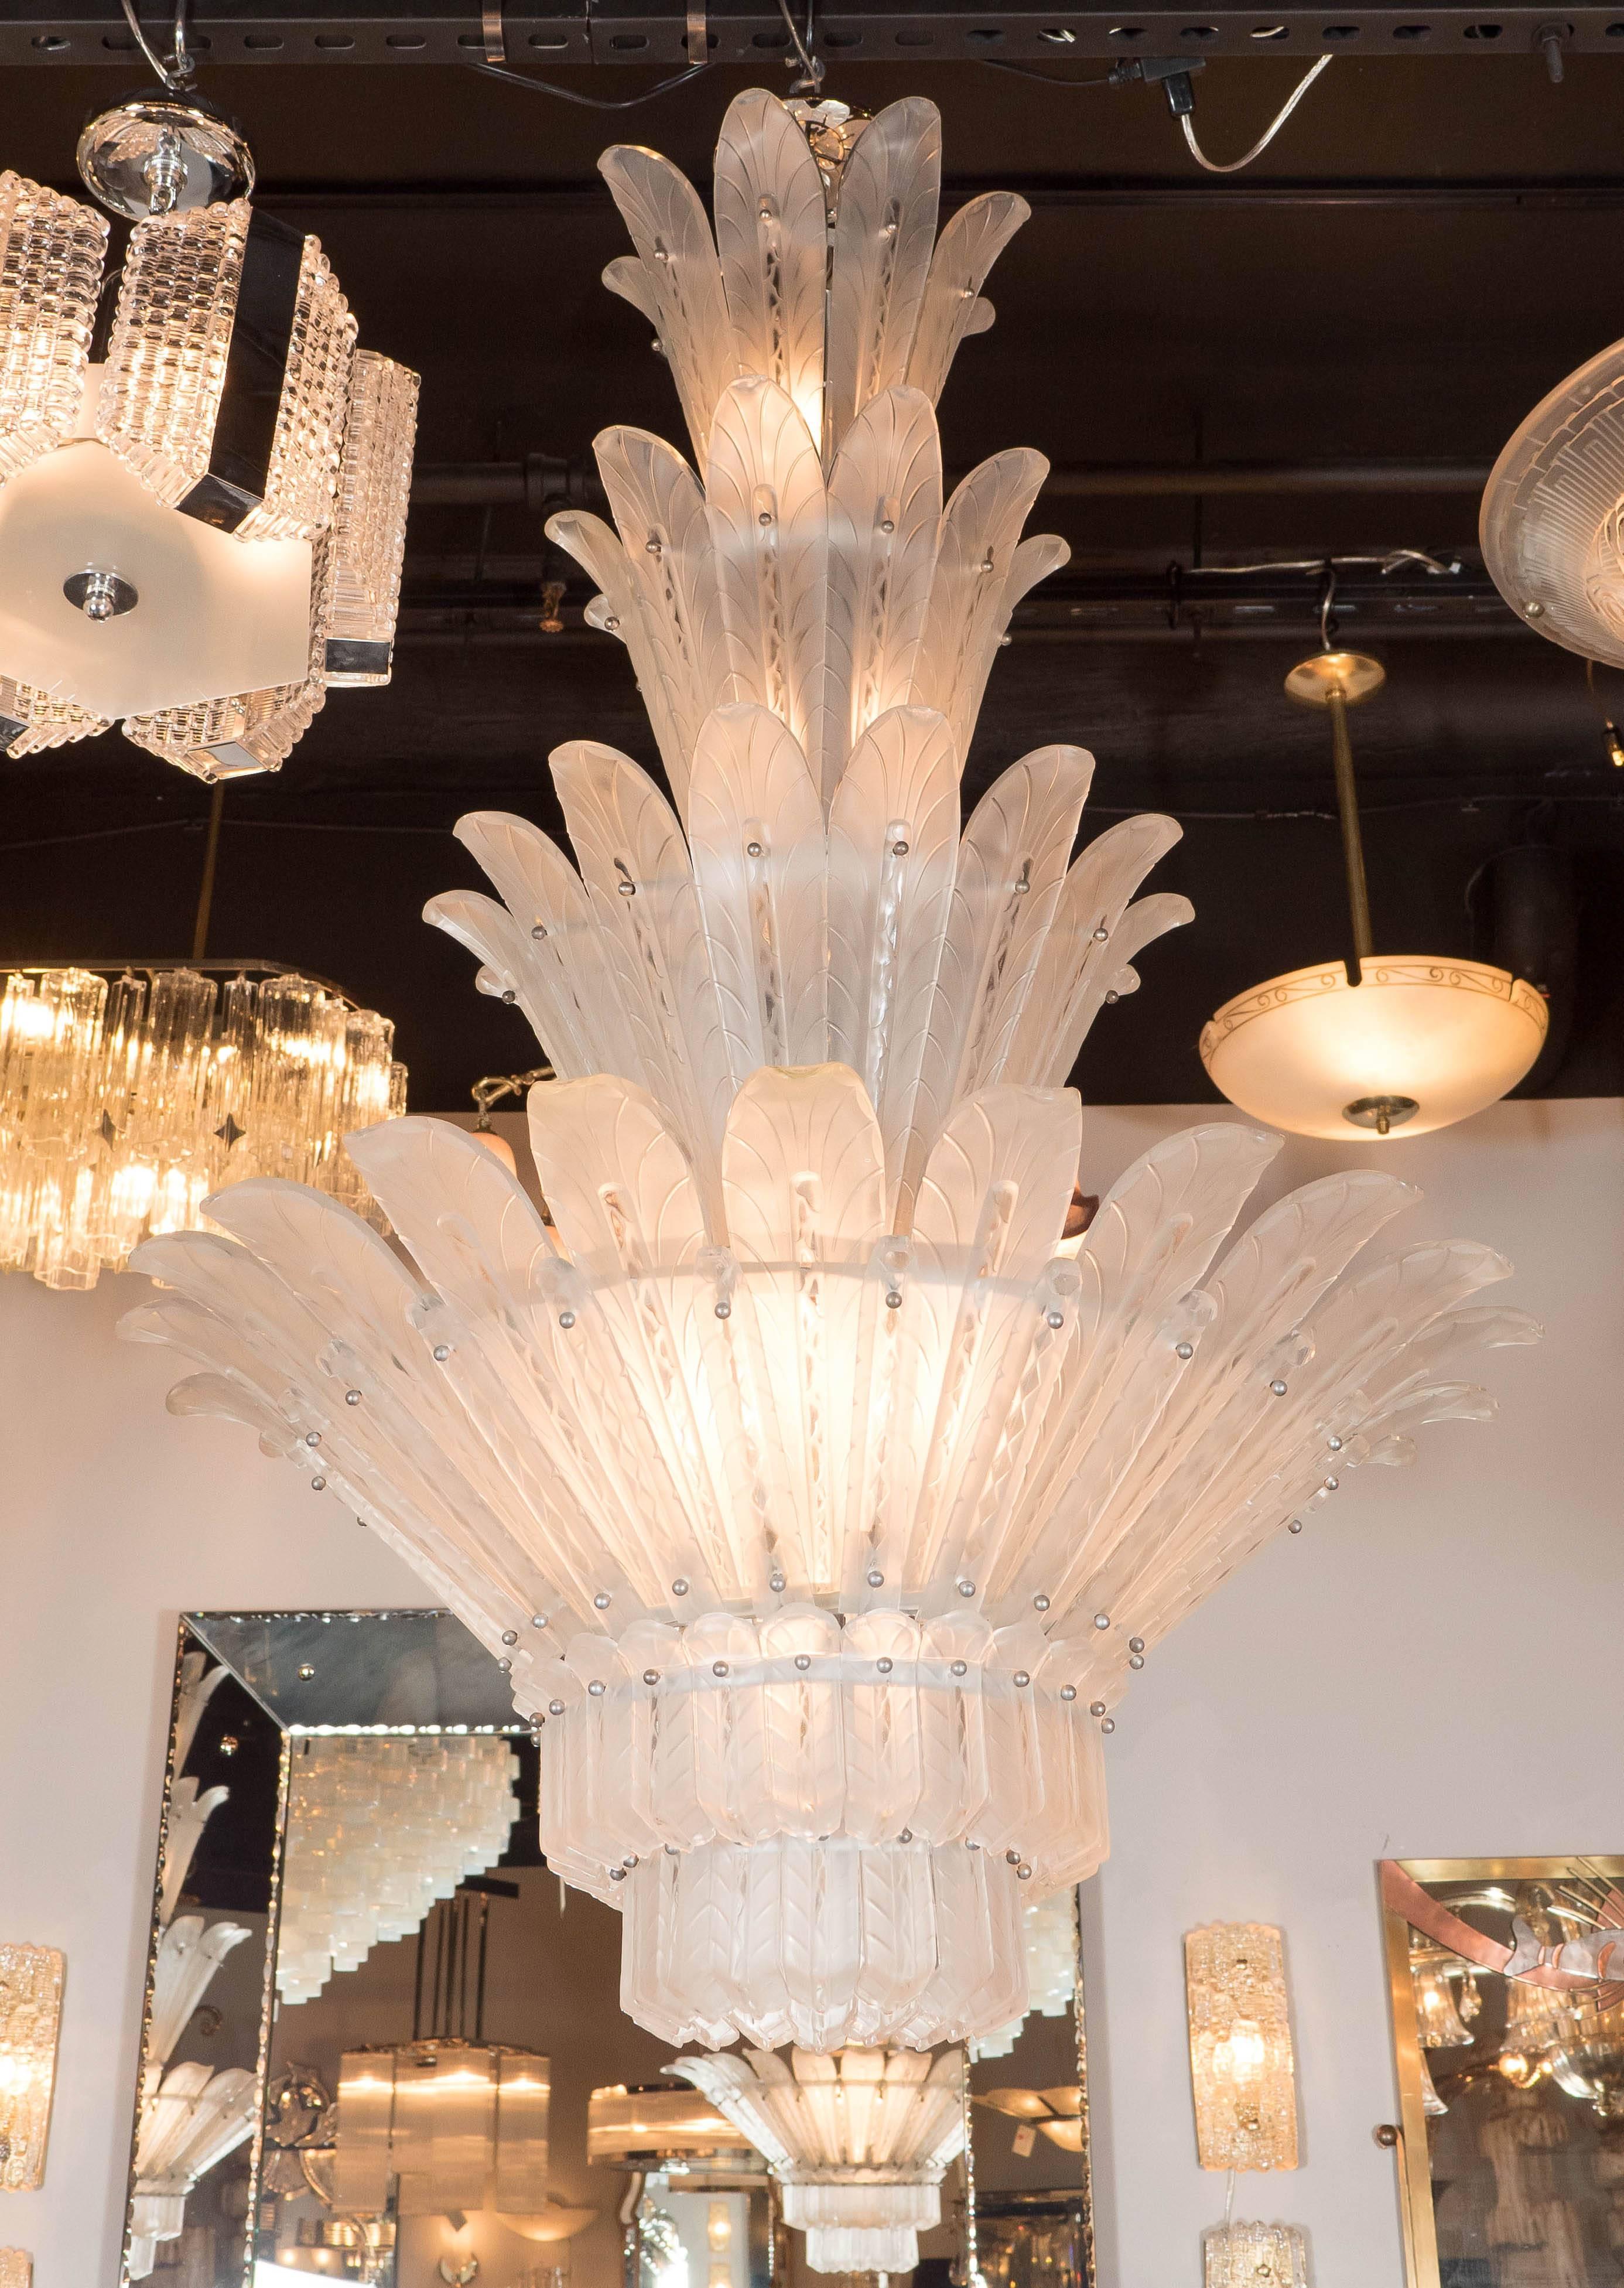 A spectacular six-tiered plume chandelier by Sabino. Its base features two layers of  chevron-etched pattern petals, and the entire fixture is comprised of frosted and clear molded glass, which lends to a wonderful glowing quality even when unlit.